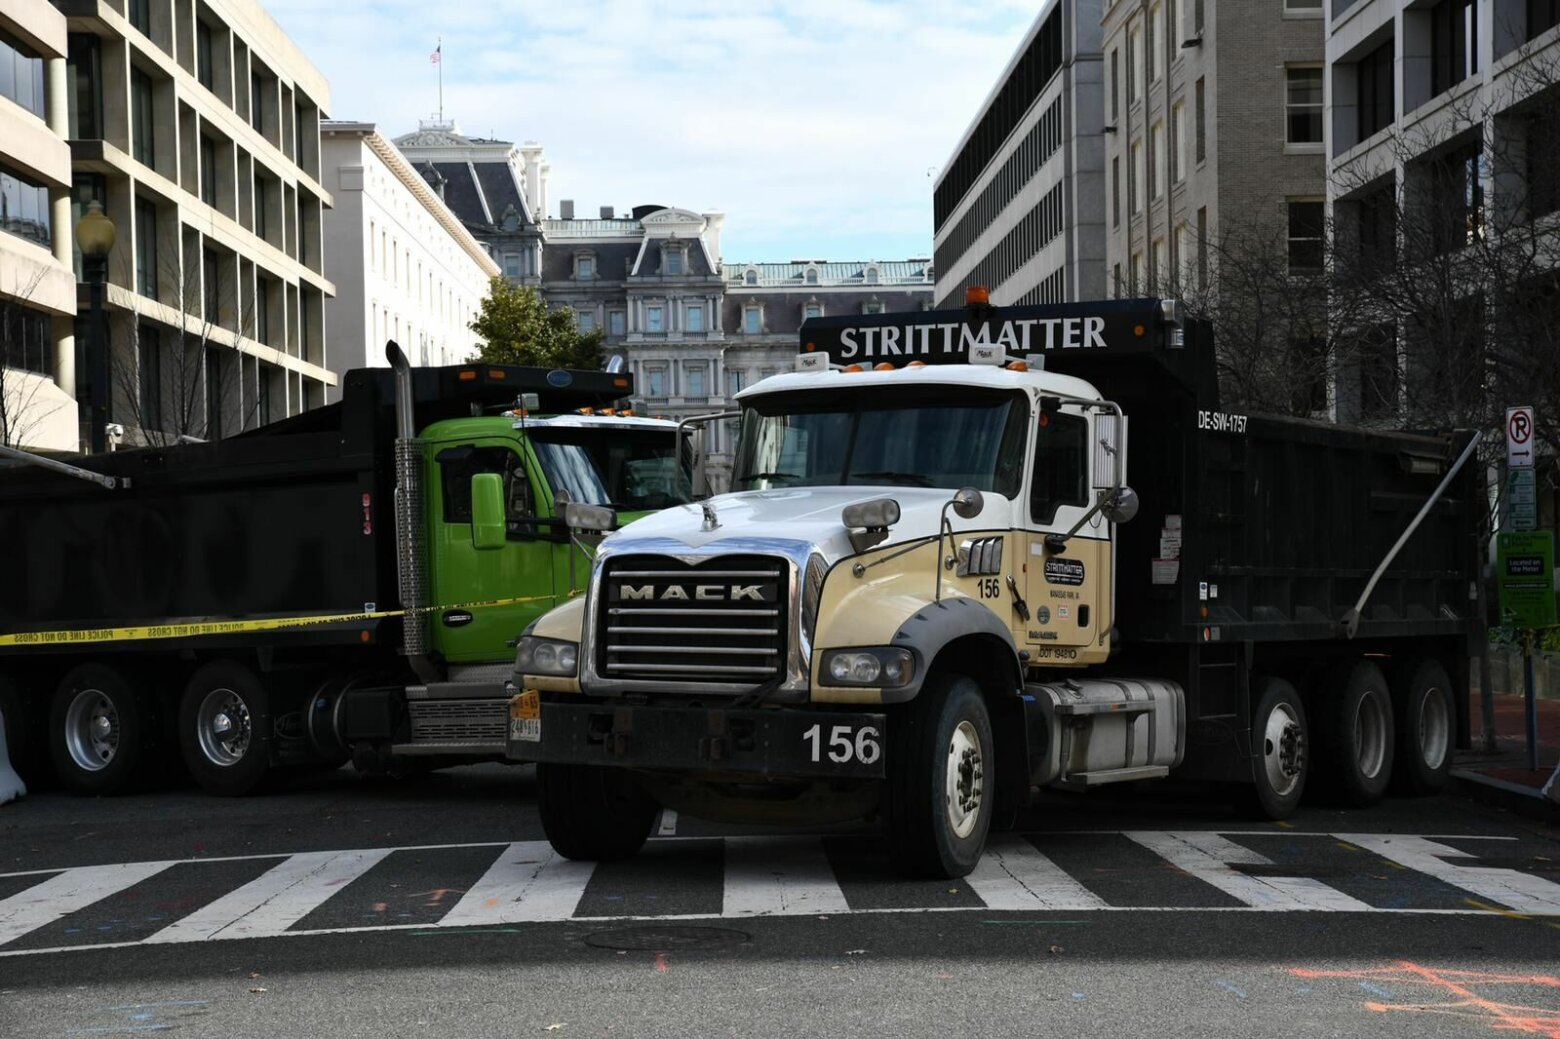 <p>D.C. streets are blocked by Mack Trucks, as well as fencing.</p>
